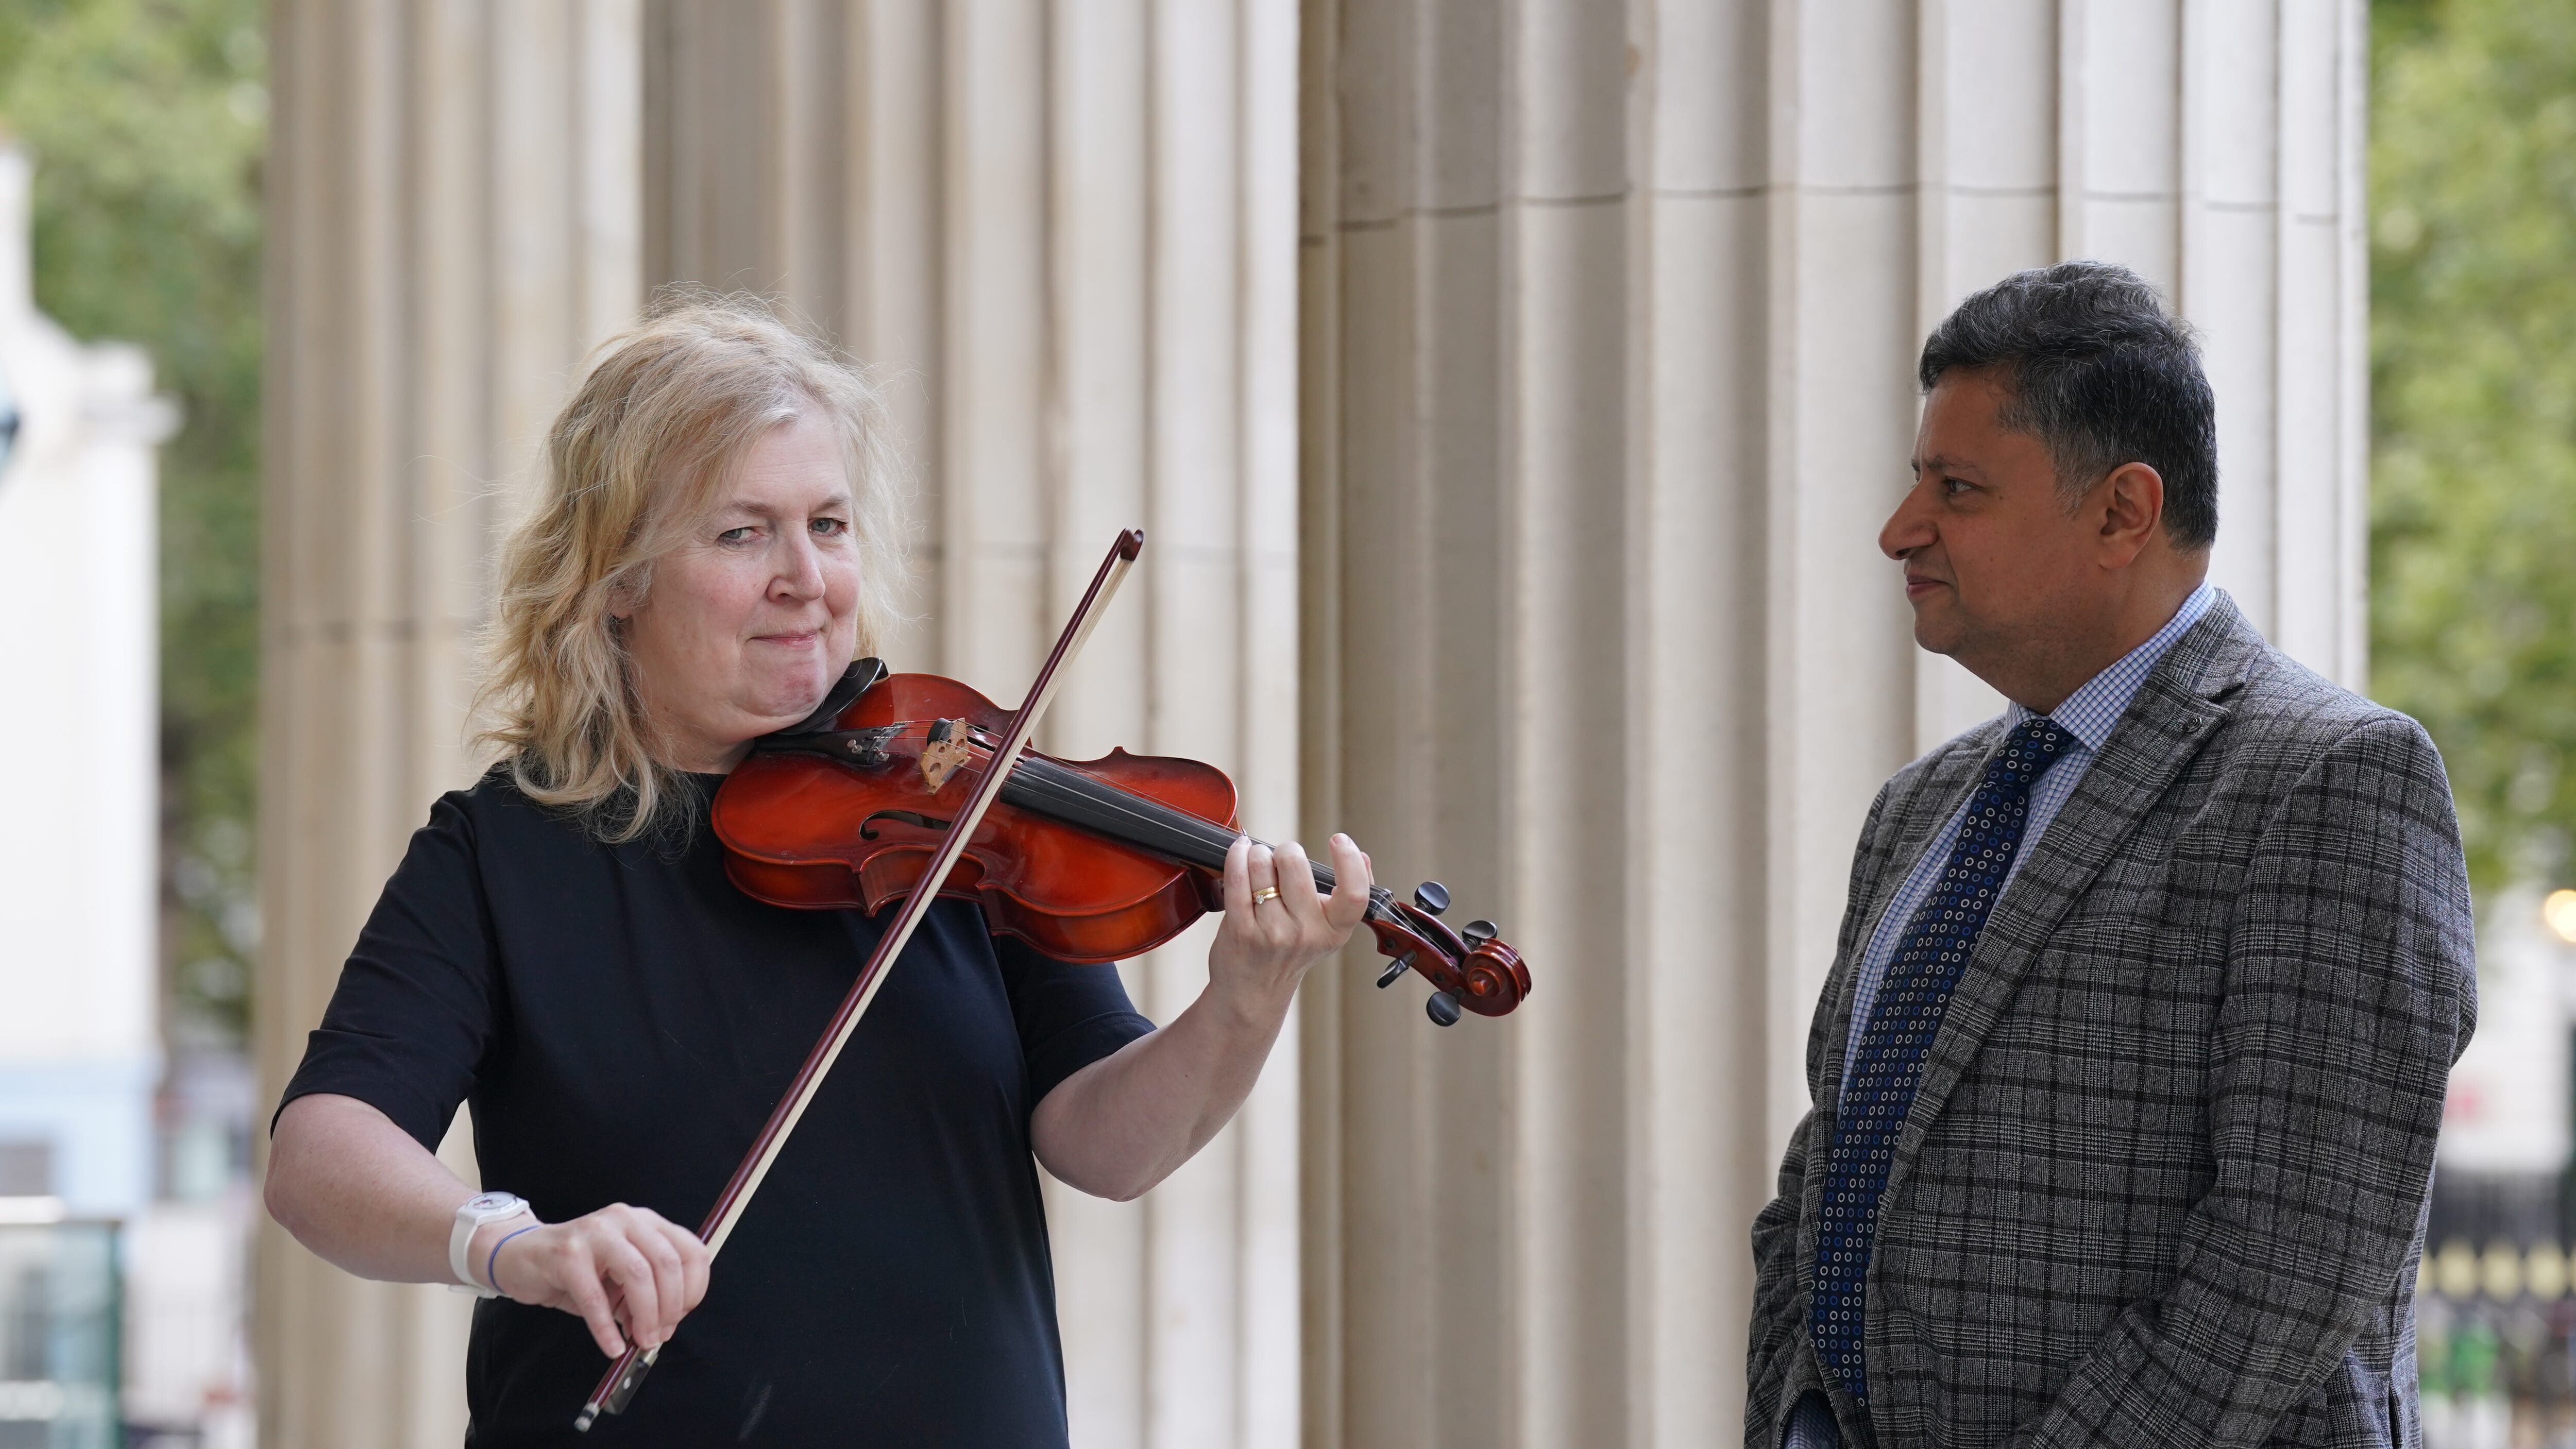 Dagmar Turner, who played the violin while surgeons removed a tumour from her brain, has been reunited with consultant neurosurgeon Professor Keyoumars Ashkan after two-and-a-half years (Lucy North/PA)